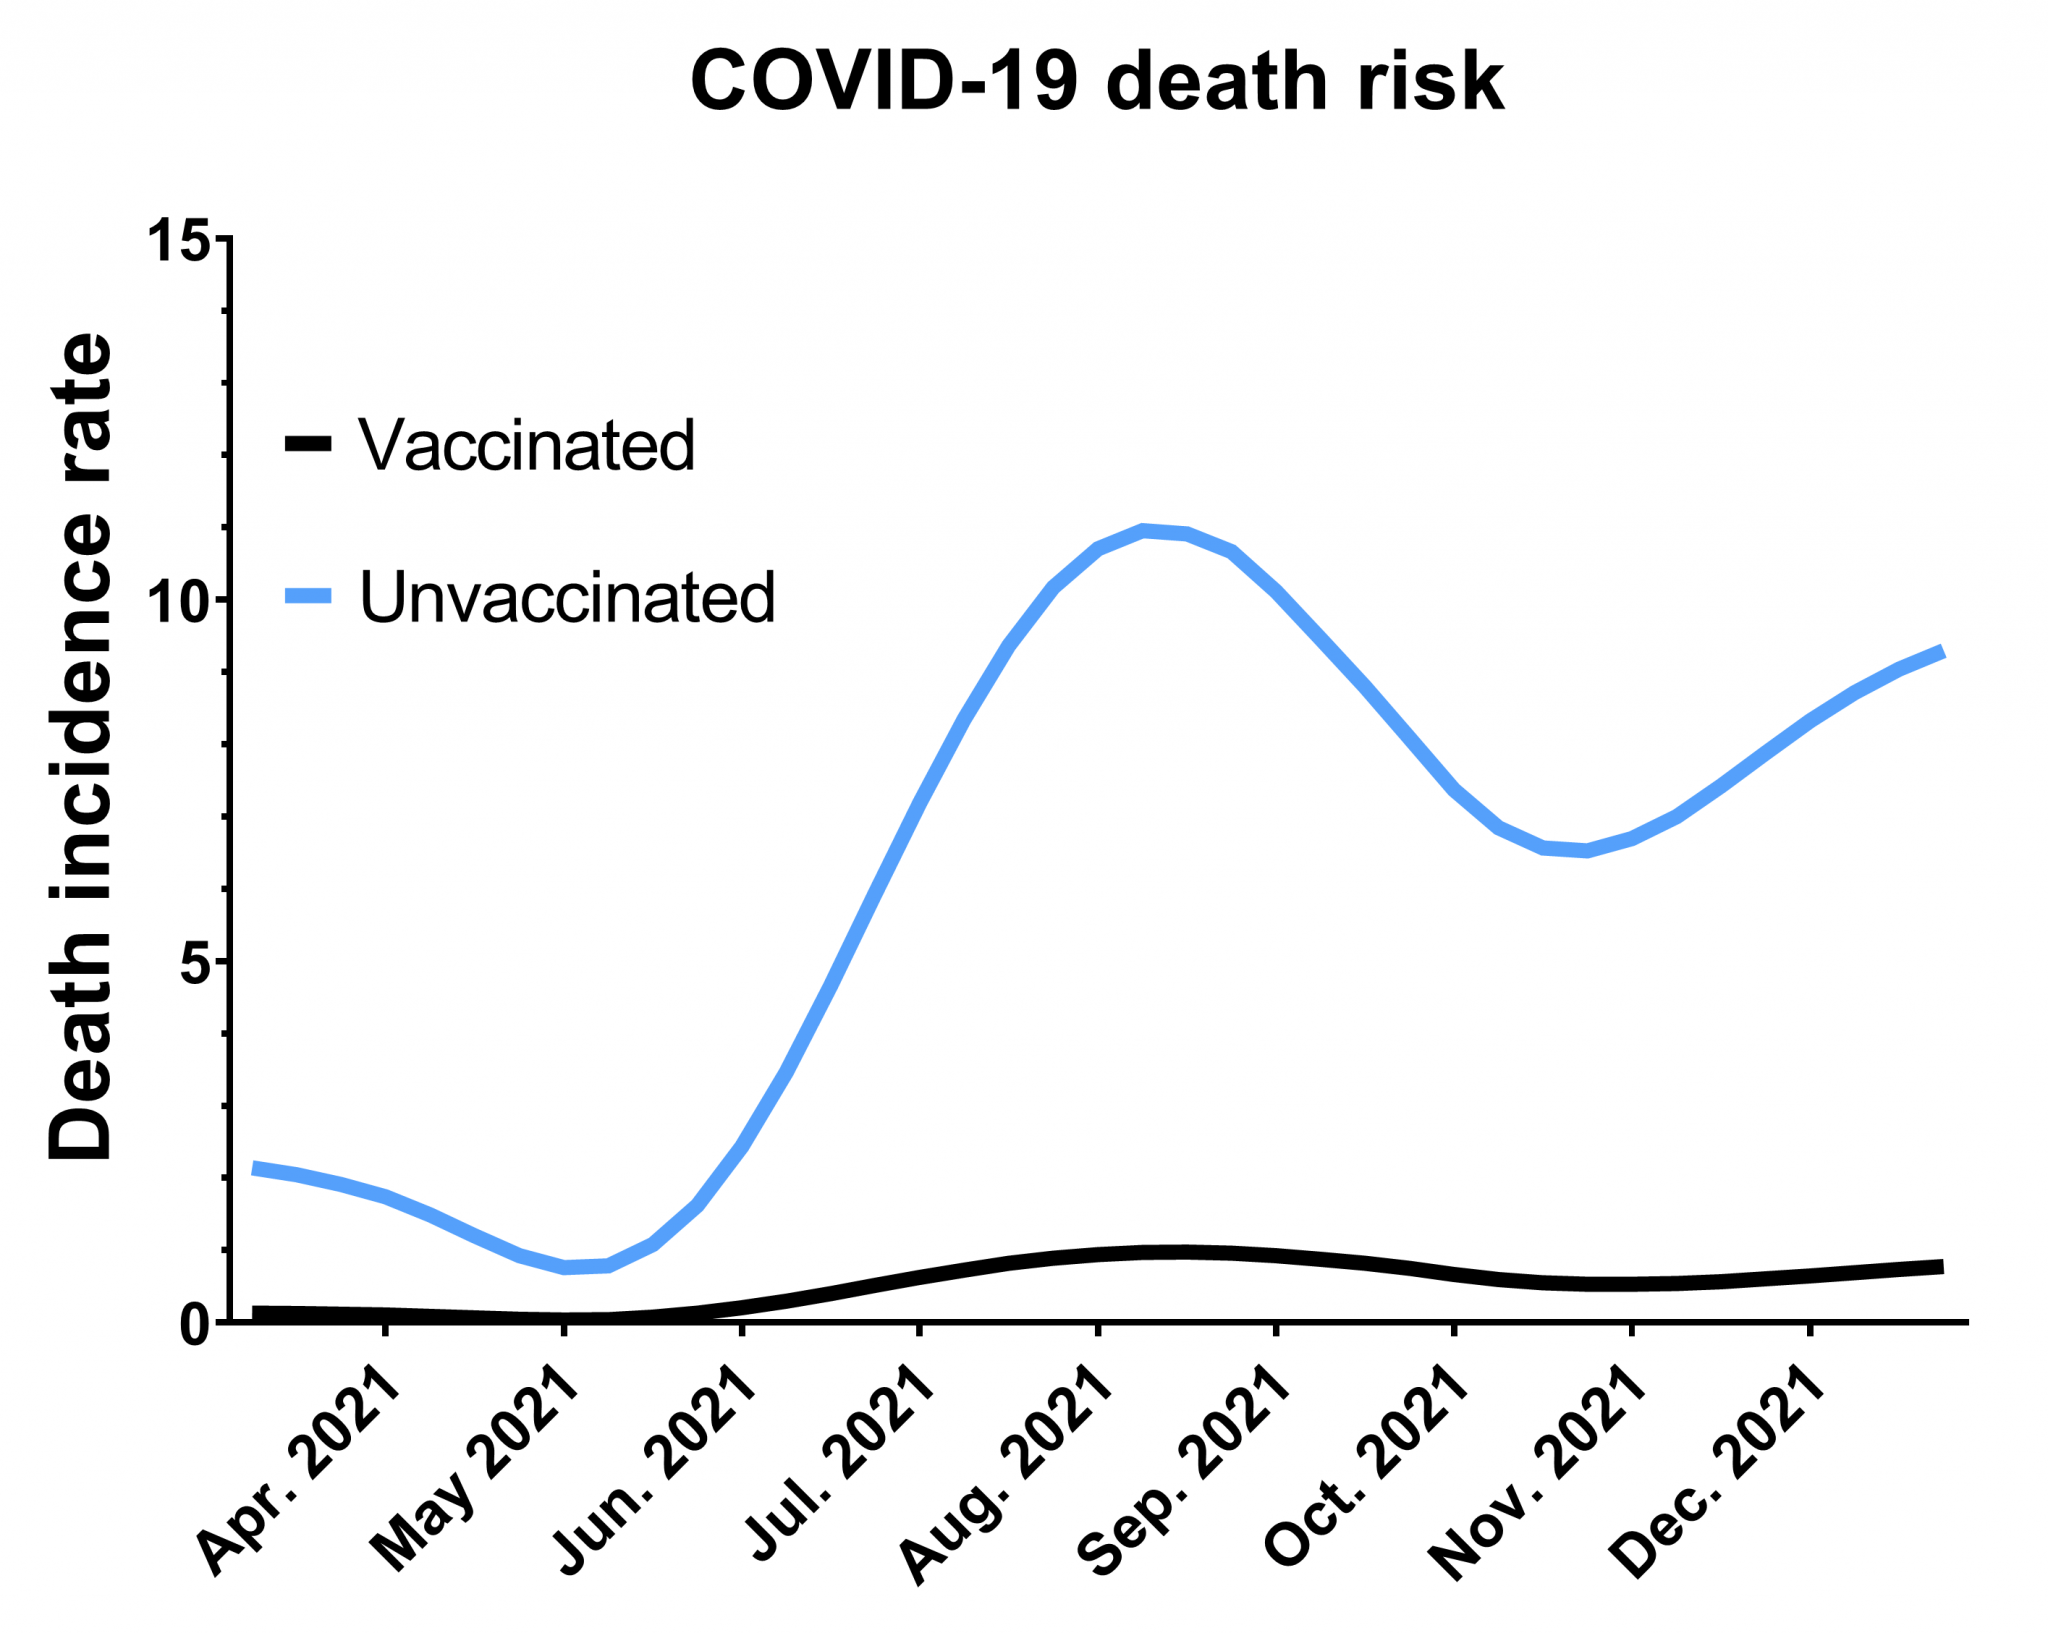 assessing-the-effect-of-covid-19-vaccines-on-mortality-a-story-of